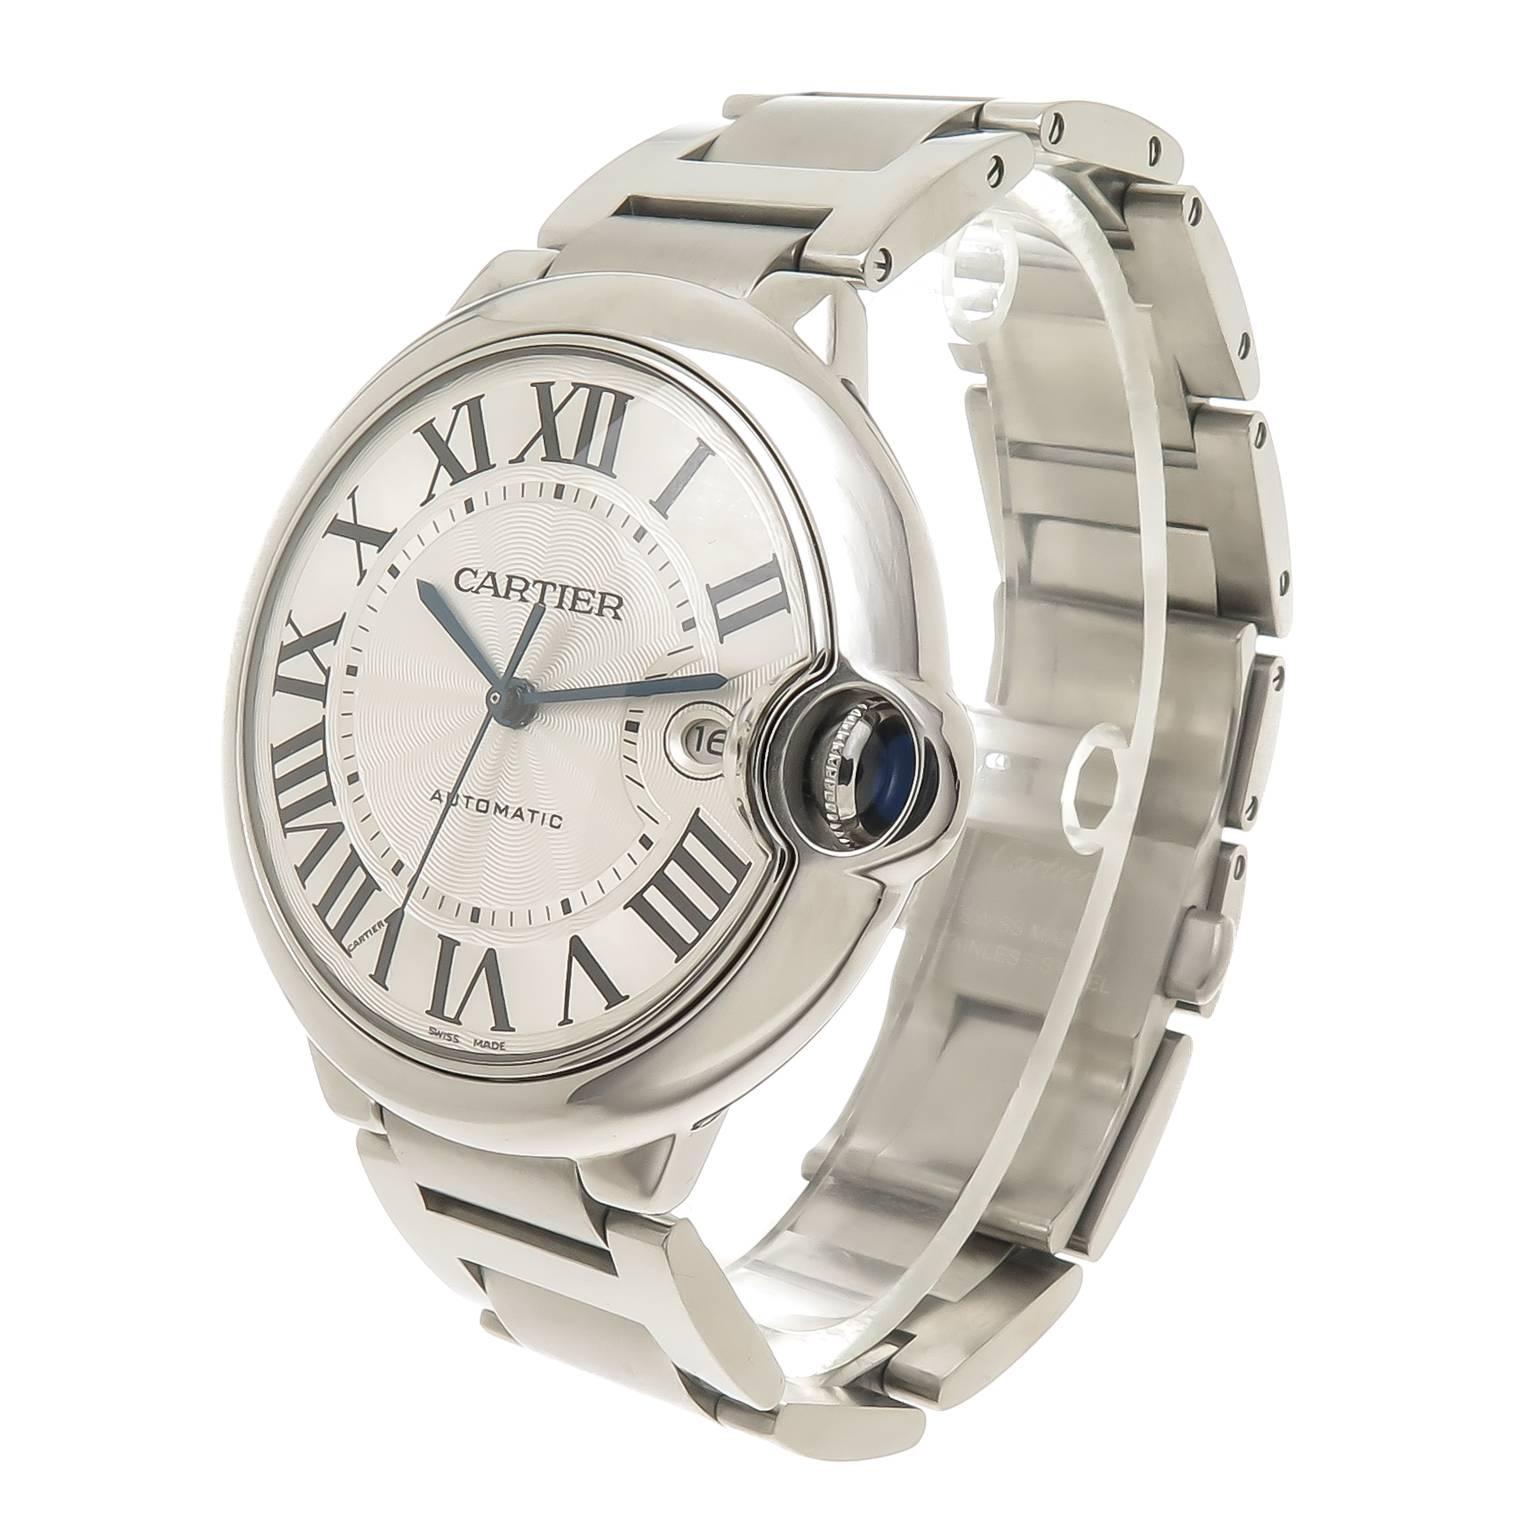 Circa 2015 Cartier Ballon Bleu, 42 MM Stainless Steel water resistant case, Automatic self winding movement, silvered dial with engine turned center, Calendar window at the 3 position, Black Roman numerals, sweep seconds hand and a scratch resistant